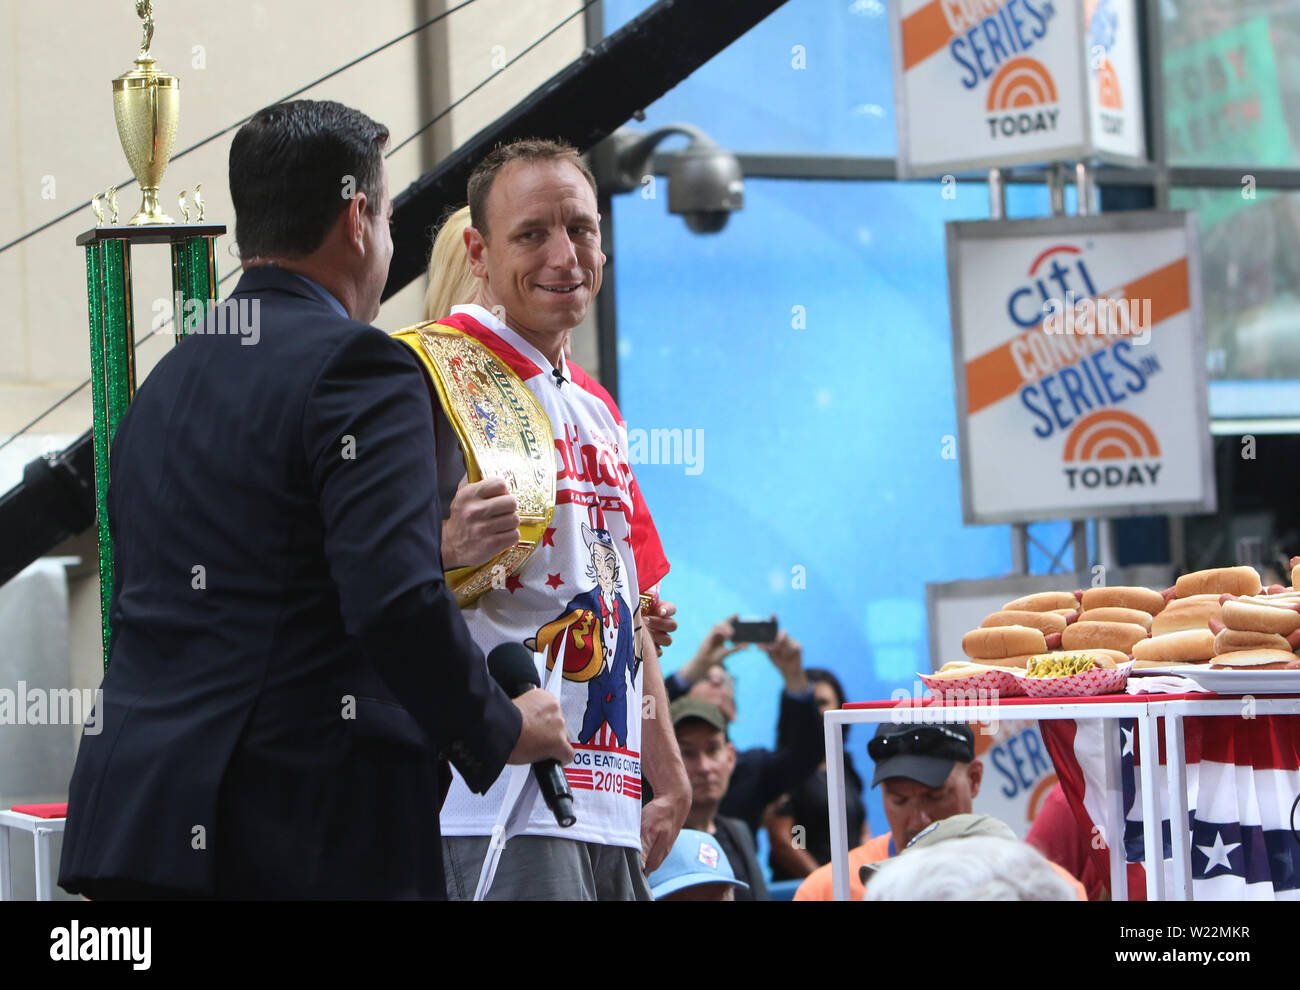 New York, NY, USA. 05th July, 2019. Joey Chestnut at NBC's Today Show to talk about his win in downing 71 hot dogs and Miki Sudo's win with downing 31 hot dogs at the 2019 Nathan's Hot Dog Eating Contest in New York City on July 05, 2019. Credit: Rw/Media Punch/Alamy Live News Stock Photo